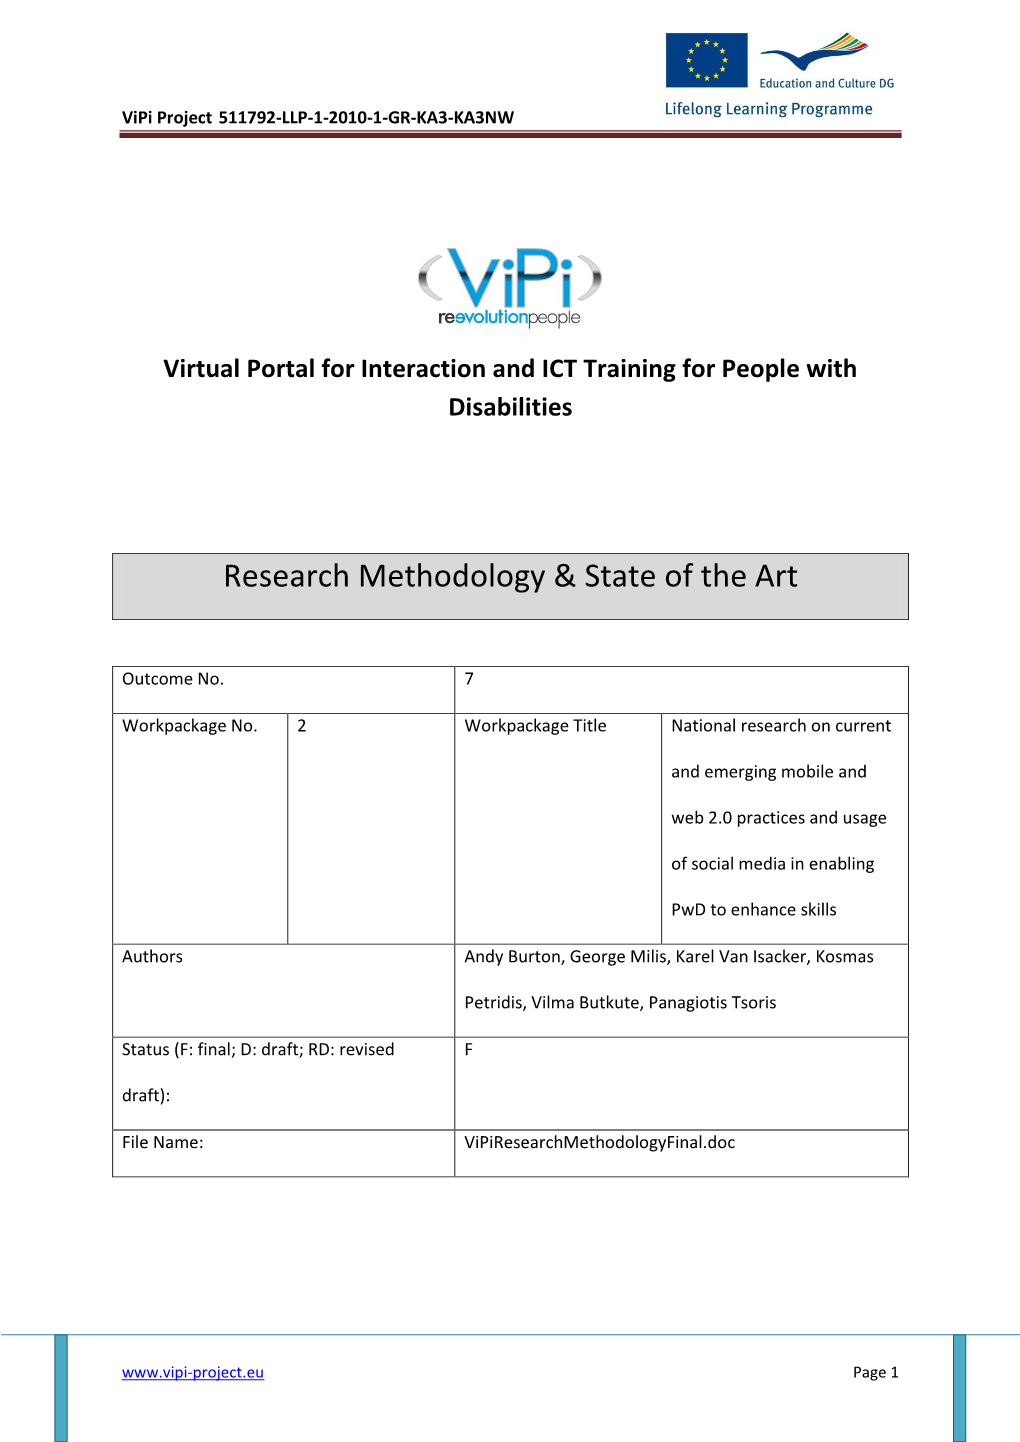 Research Methodology & State of The